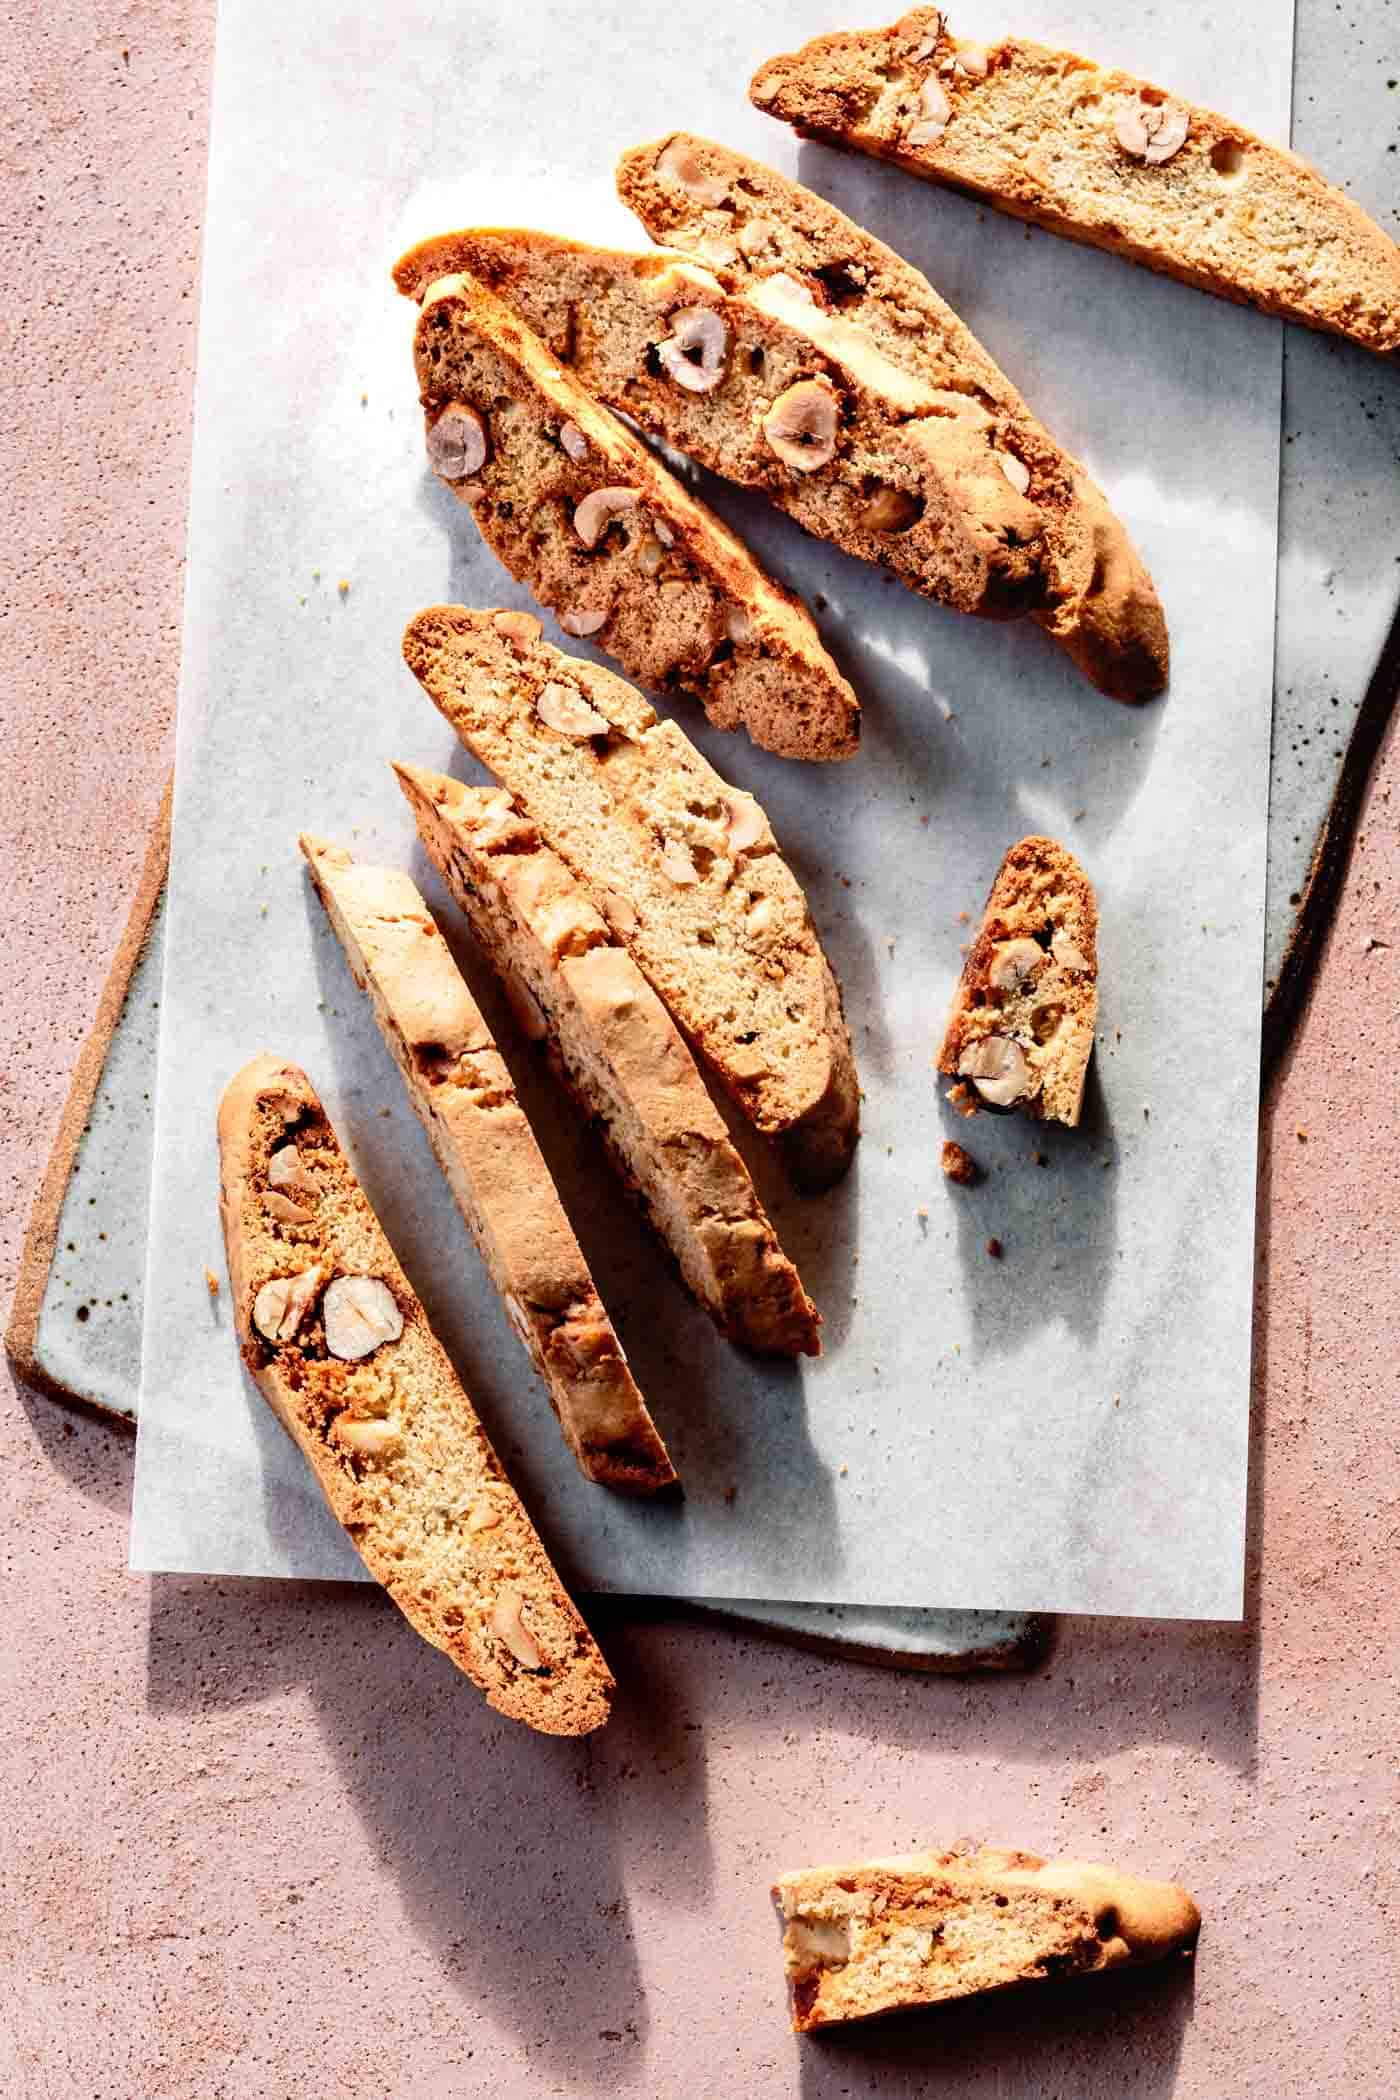 Gluten-free biscotti, fresh out of the oven